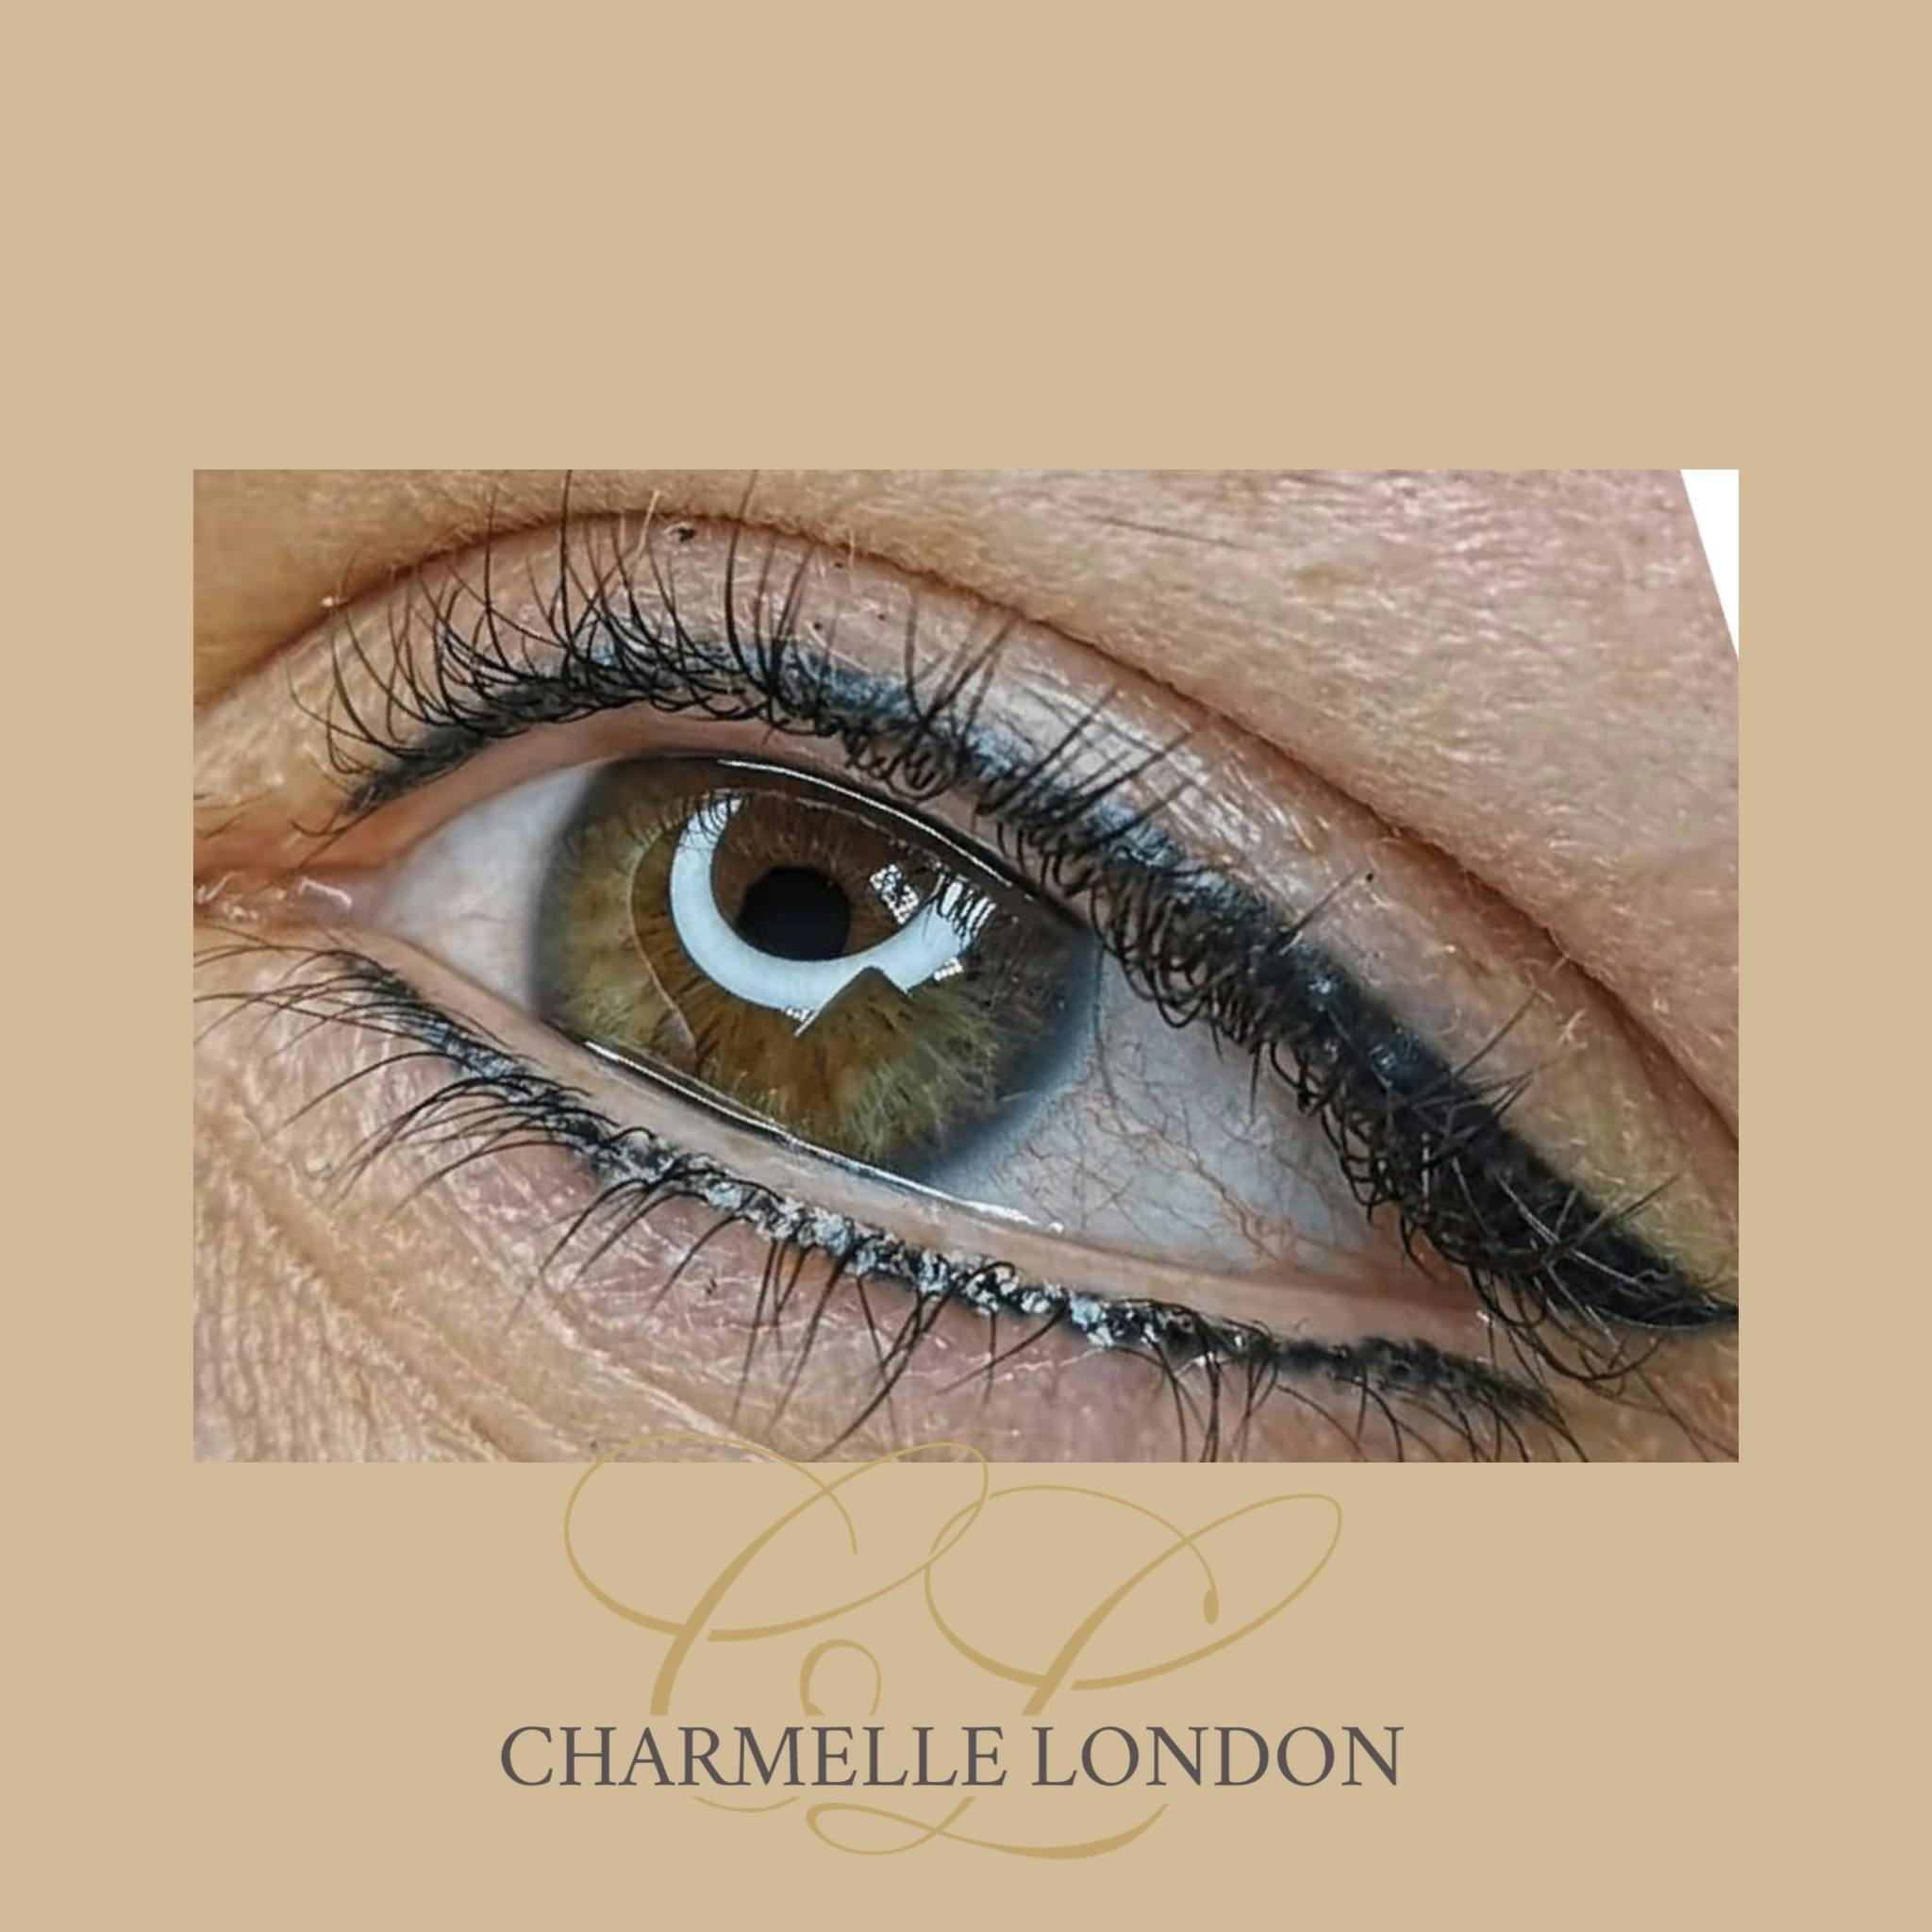 Winged Eyeliner Enhancement Flawless, smudge proof eyeliner crafted with winged effect to define the eye. Call 0333 016 3500 to book today.